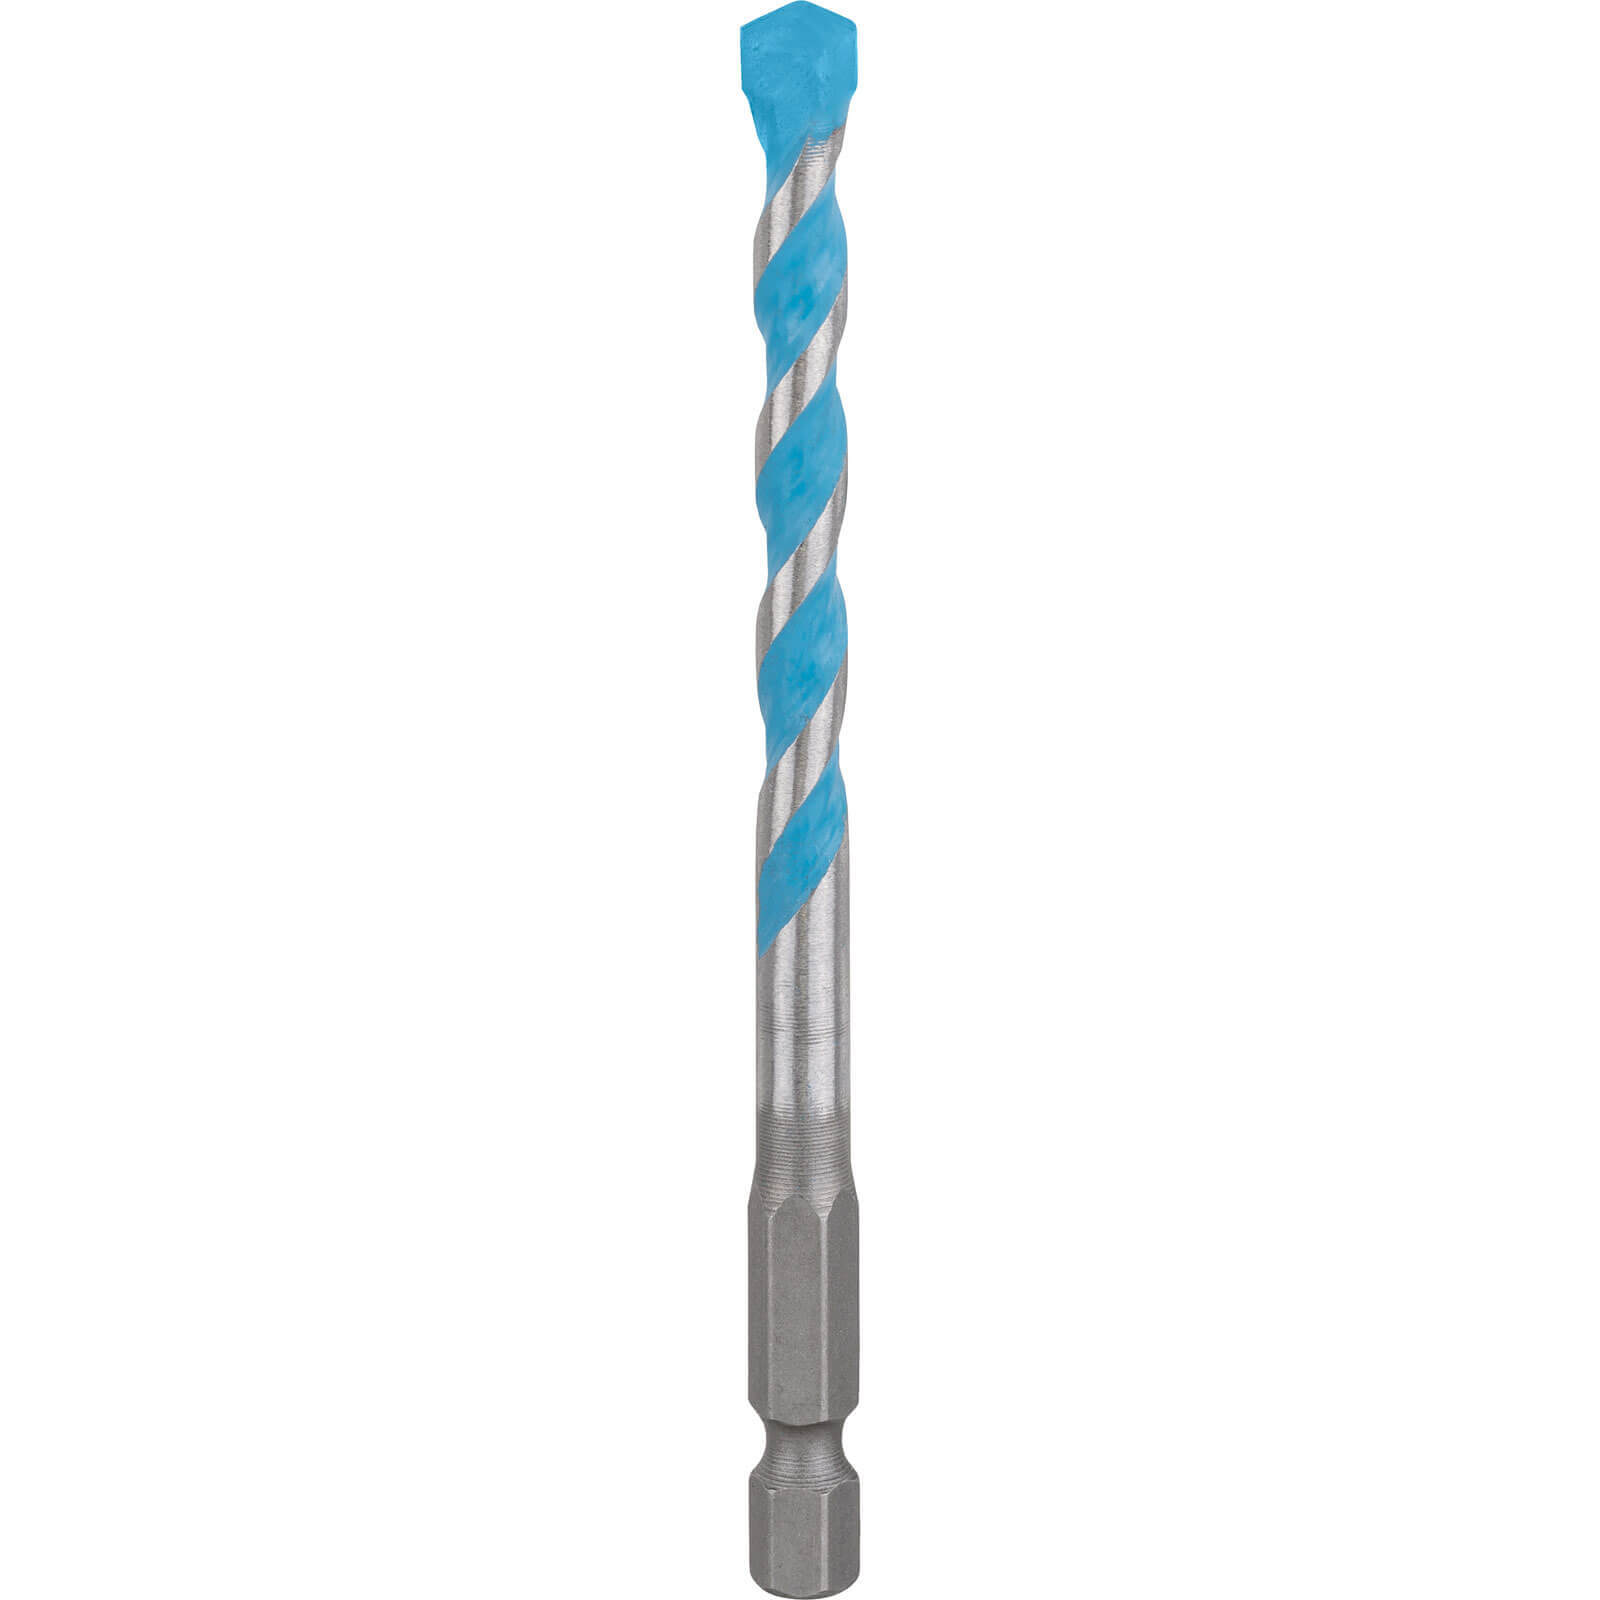 Image of Bosch Expert HEX-9 Multi Construction Drill Bit 7mm 100mm Pack of 1